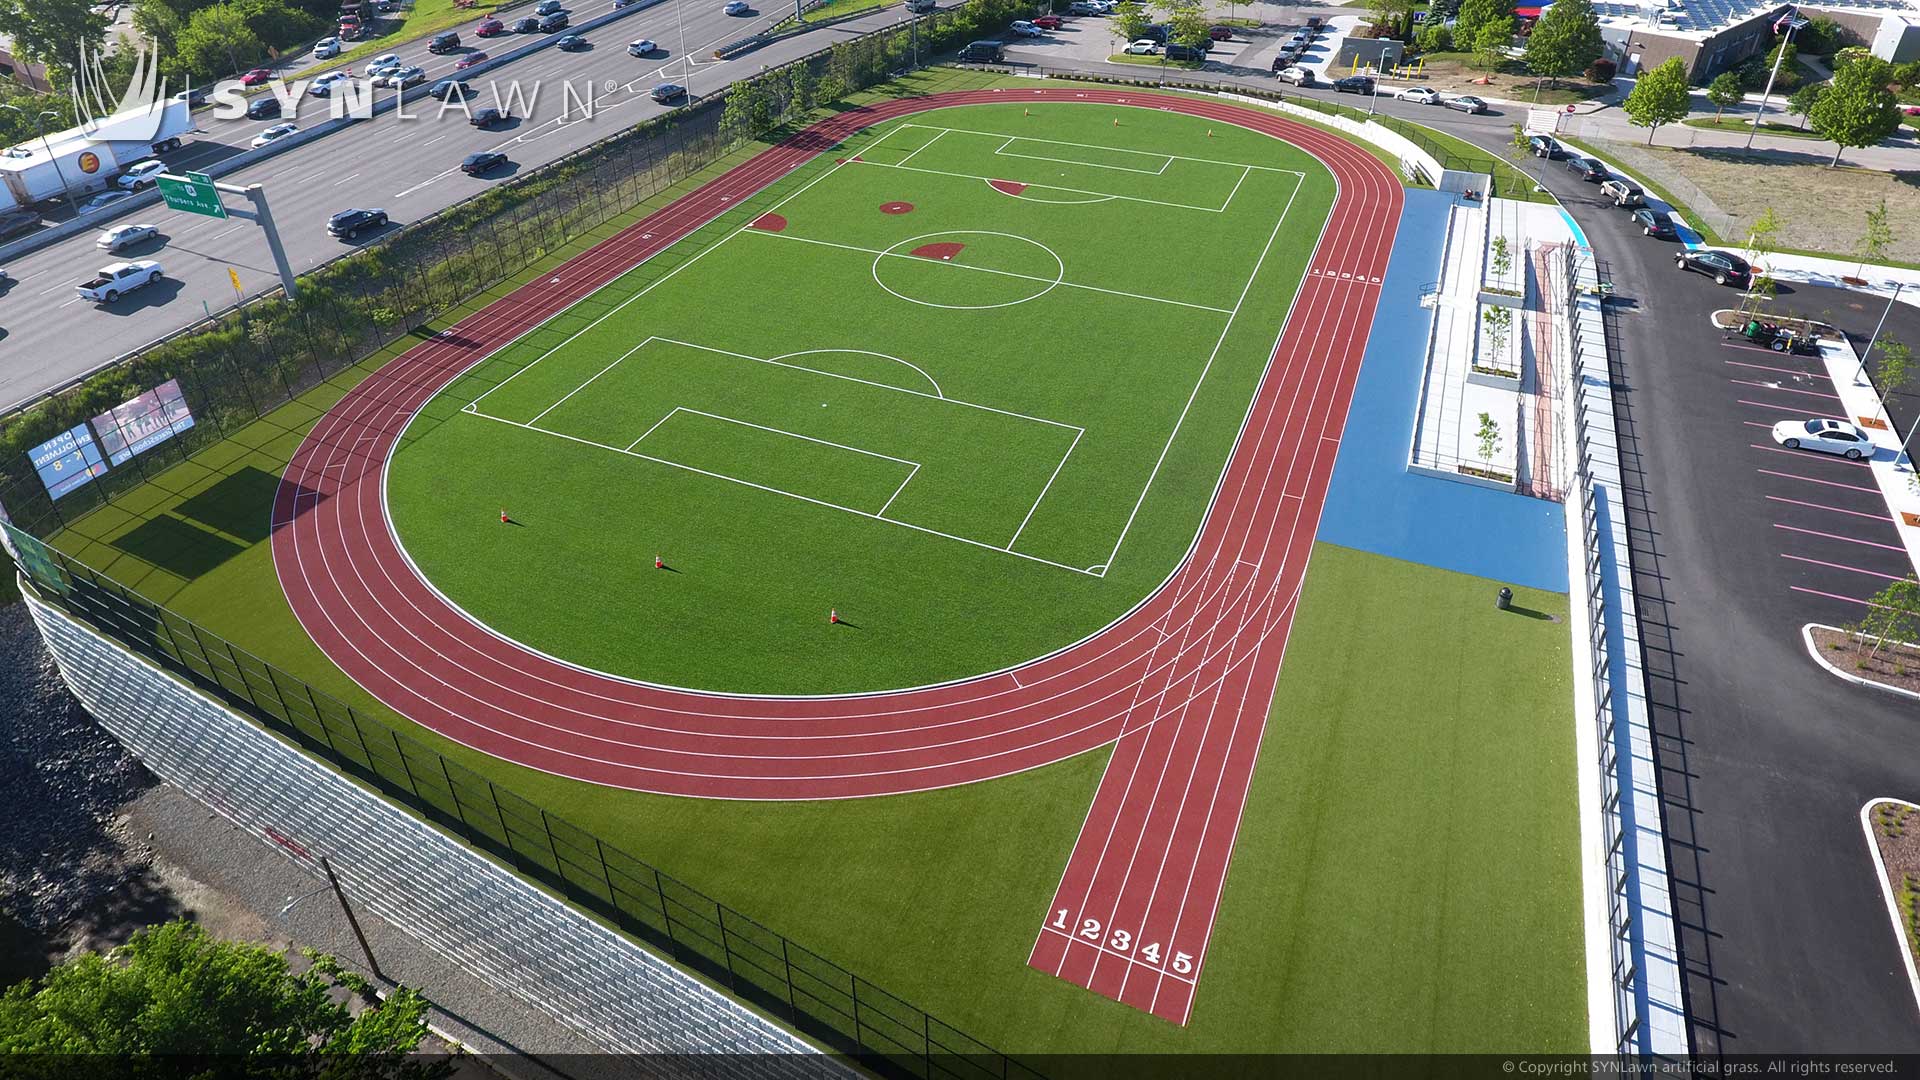 Track field and football field with artificial grass